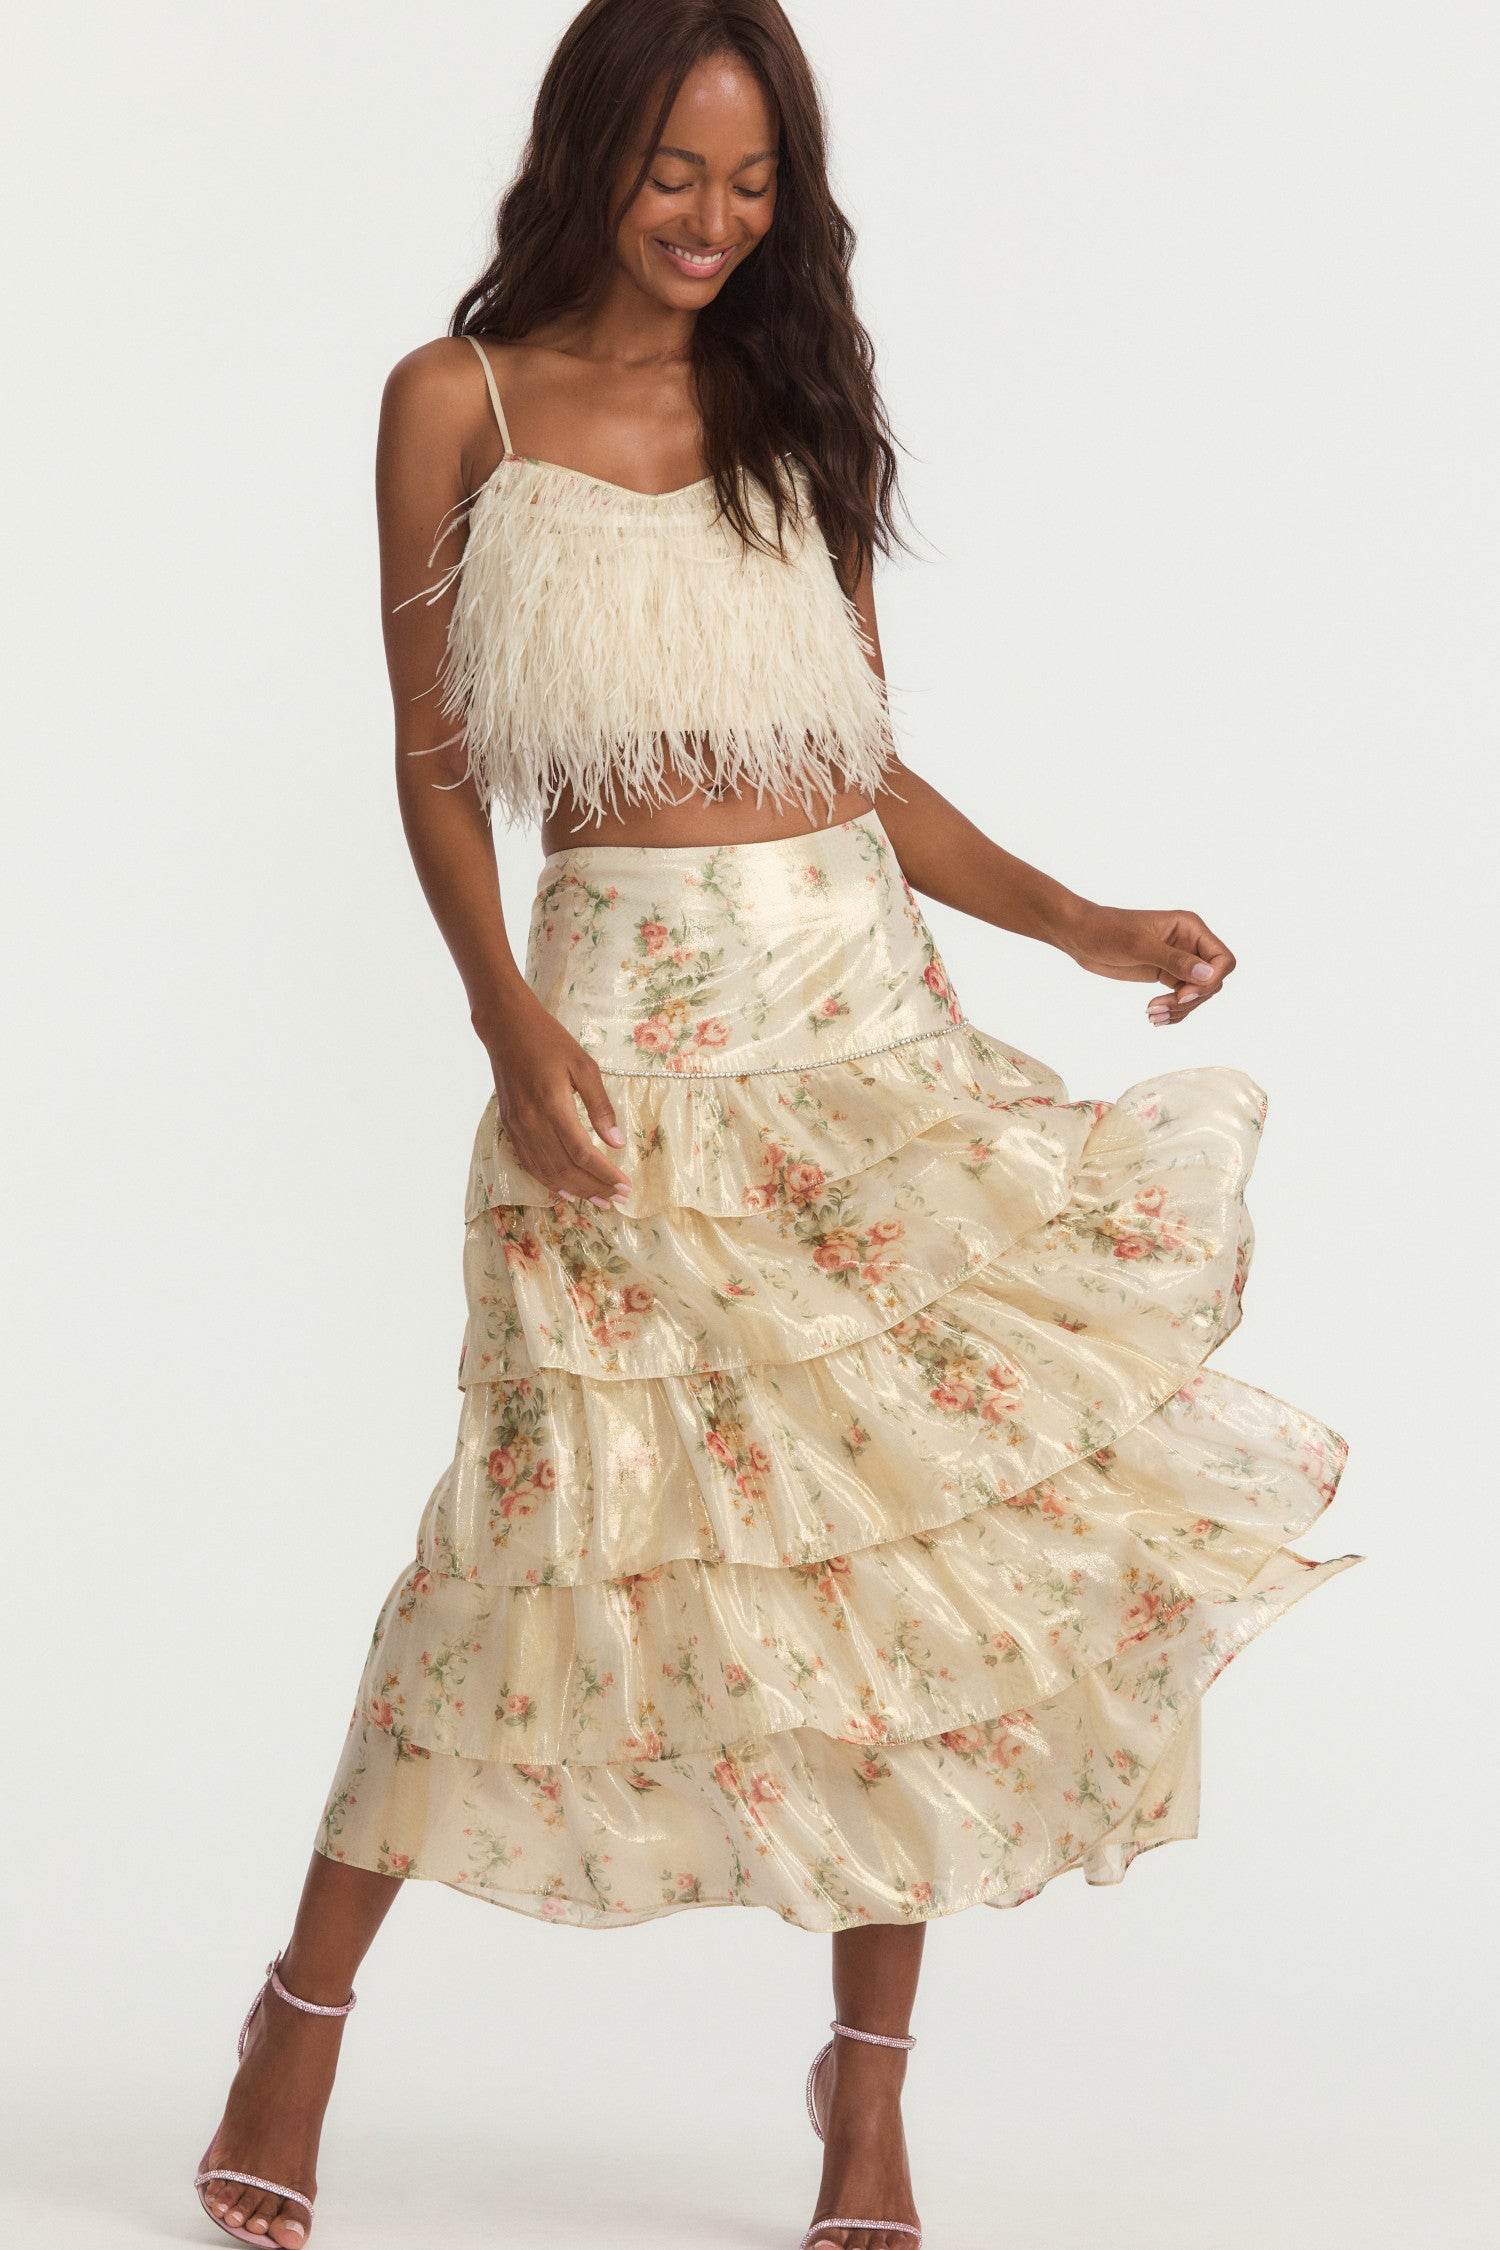 Off-white midi skirt, with floral print that paints a lurex lame fabric featuring a rhinestone trim at the flounce seam and yoke, a slit on the left, and a gold exposed metal zipper. 